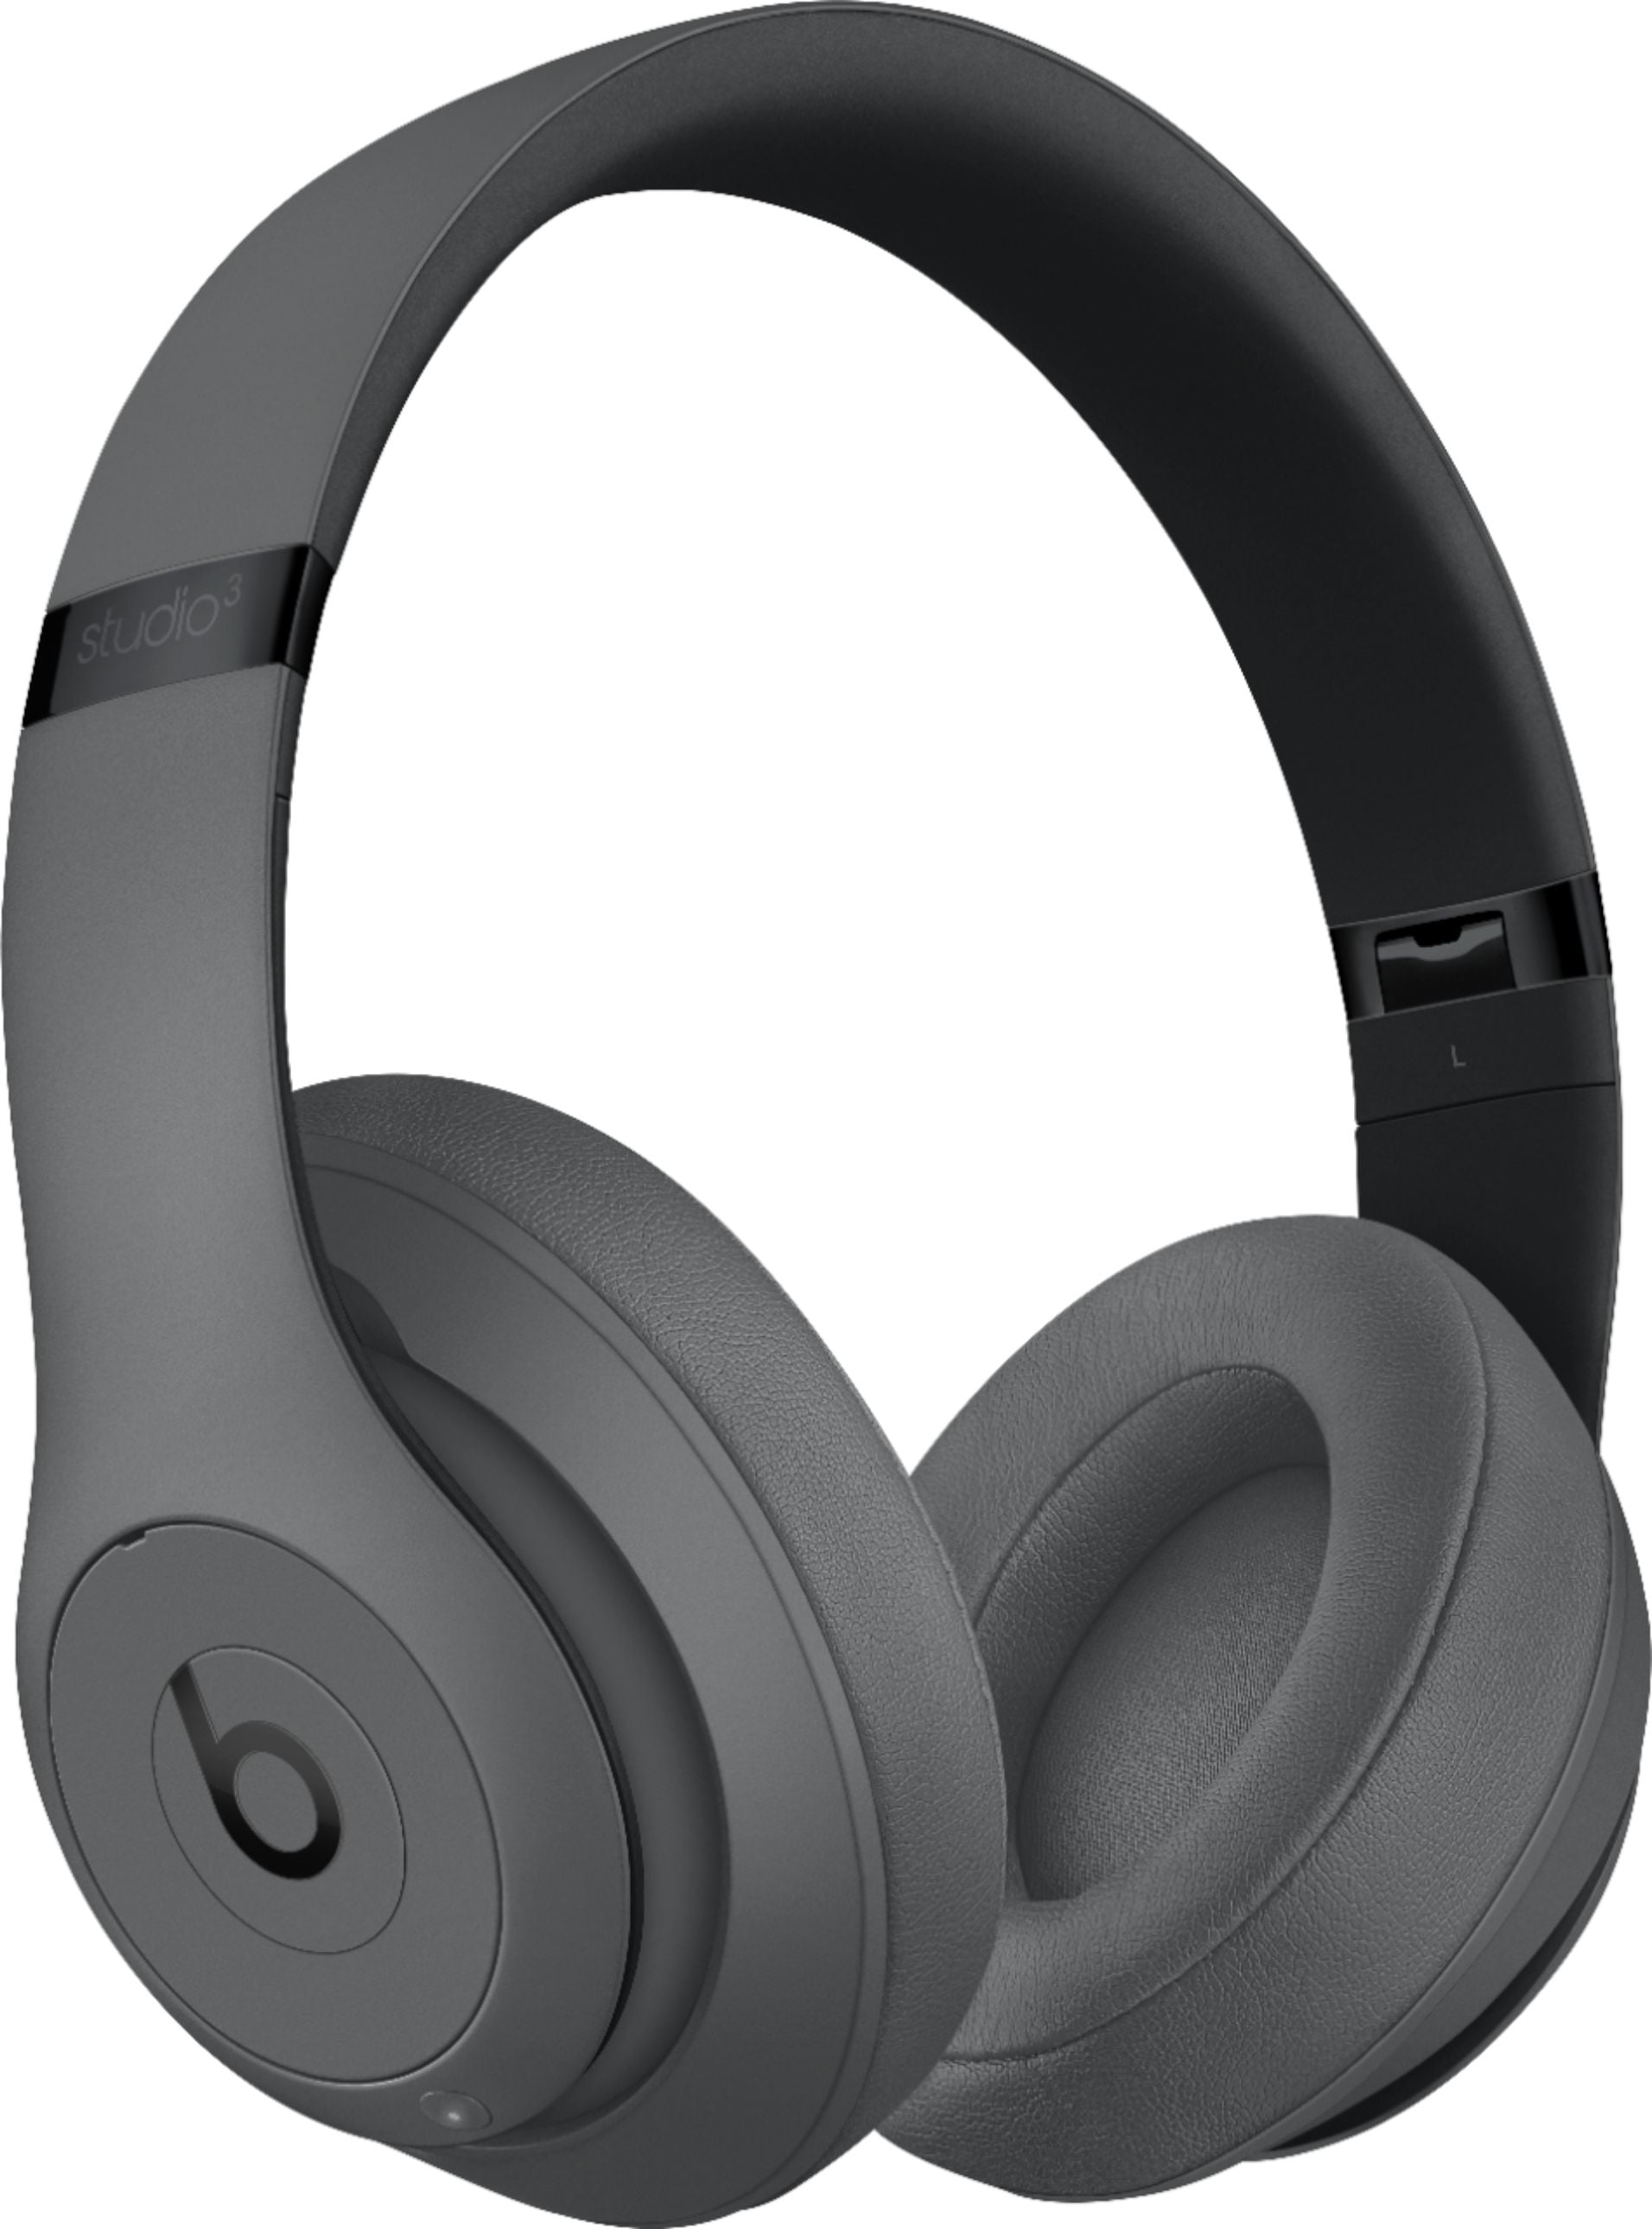 Beats by Dr. Dre Bluetooth Noise-Canceling Over-Ear Headphones, Gray,  MTQY2LL/A